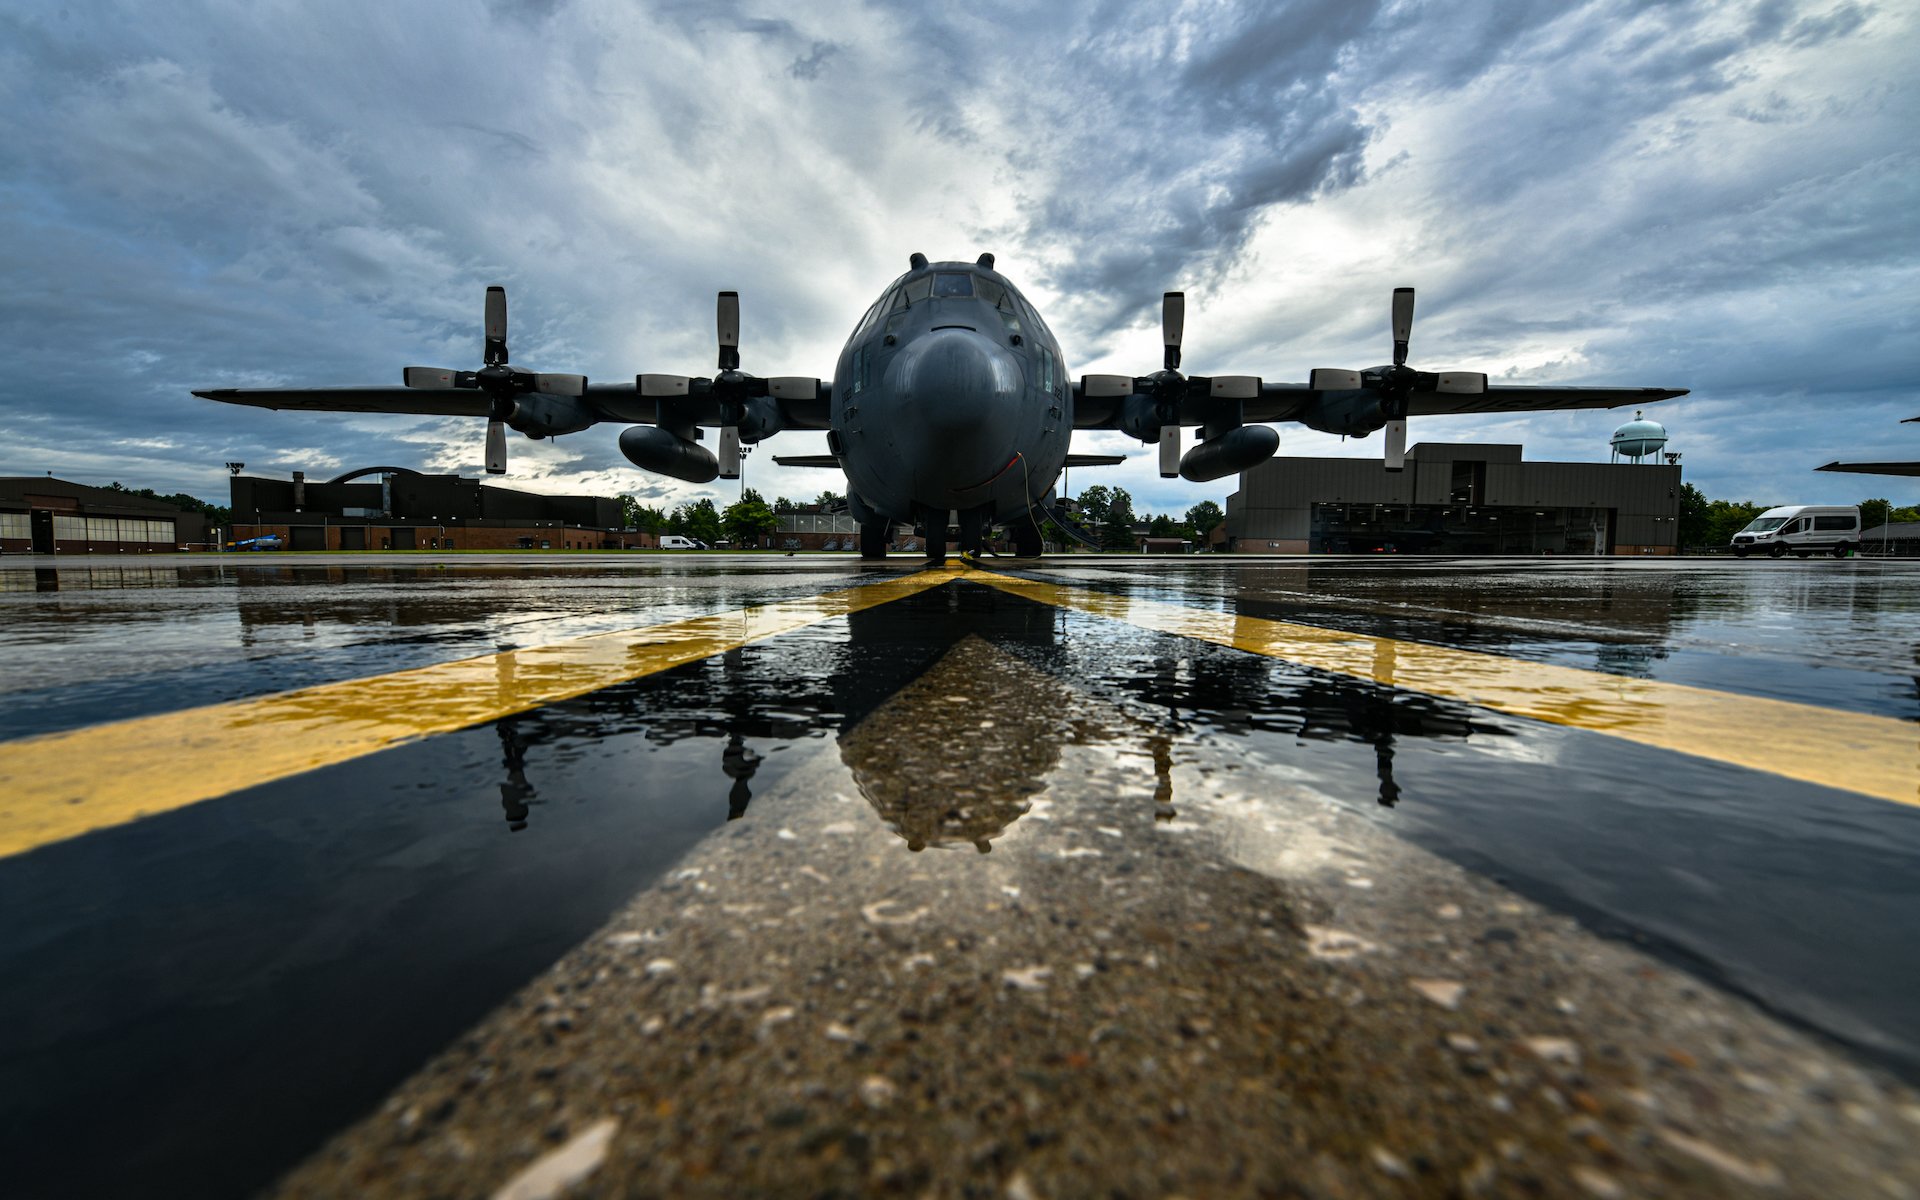 A C-130H Hercules aircraft assigned to the 757th Airlift Squadron sits on the flightline, July 22, 2020, at Youngstown Air Reserve Station in Vienna, Ohio. Unlike newer C-130Js, C-130Hs have four metal propellers on each engine. Air Force Photo by Senior Airman Christina Russo.